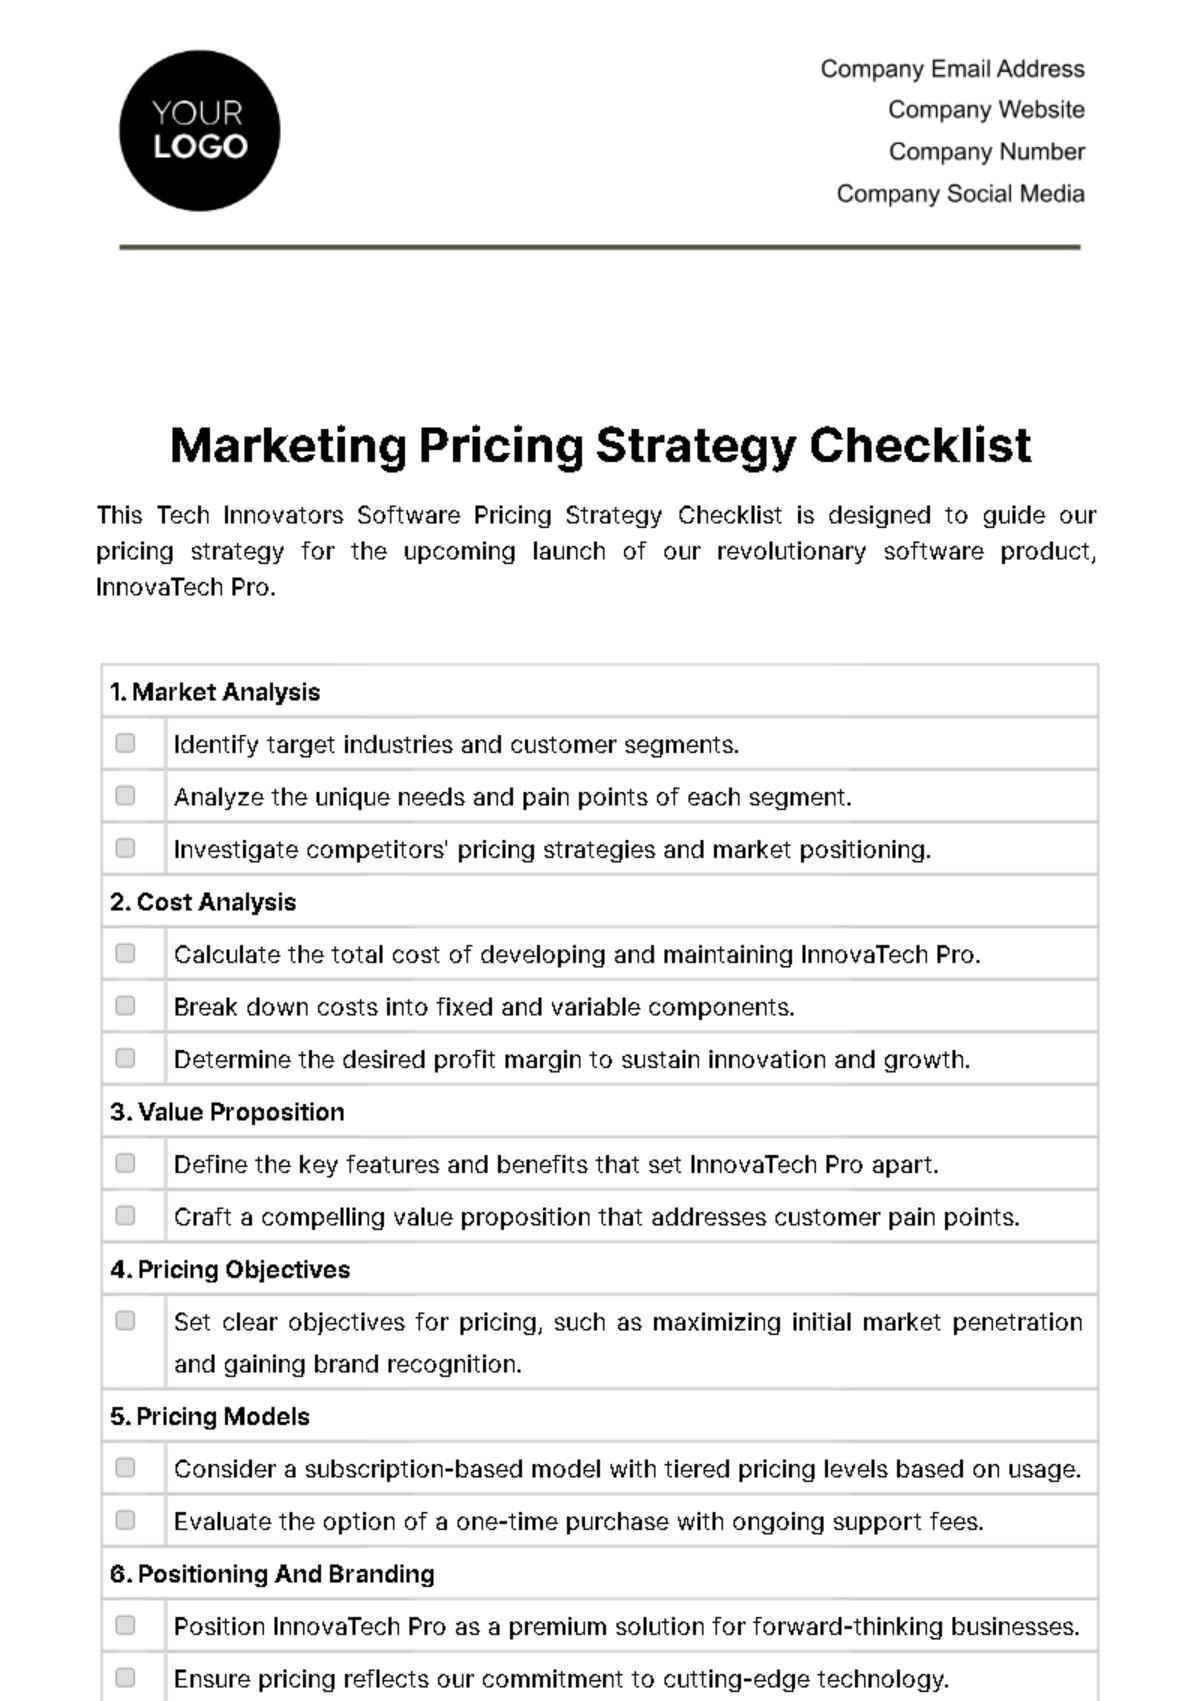 Free Marketing Pricing Strategy Checklist Template